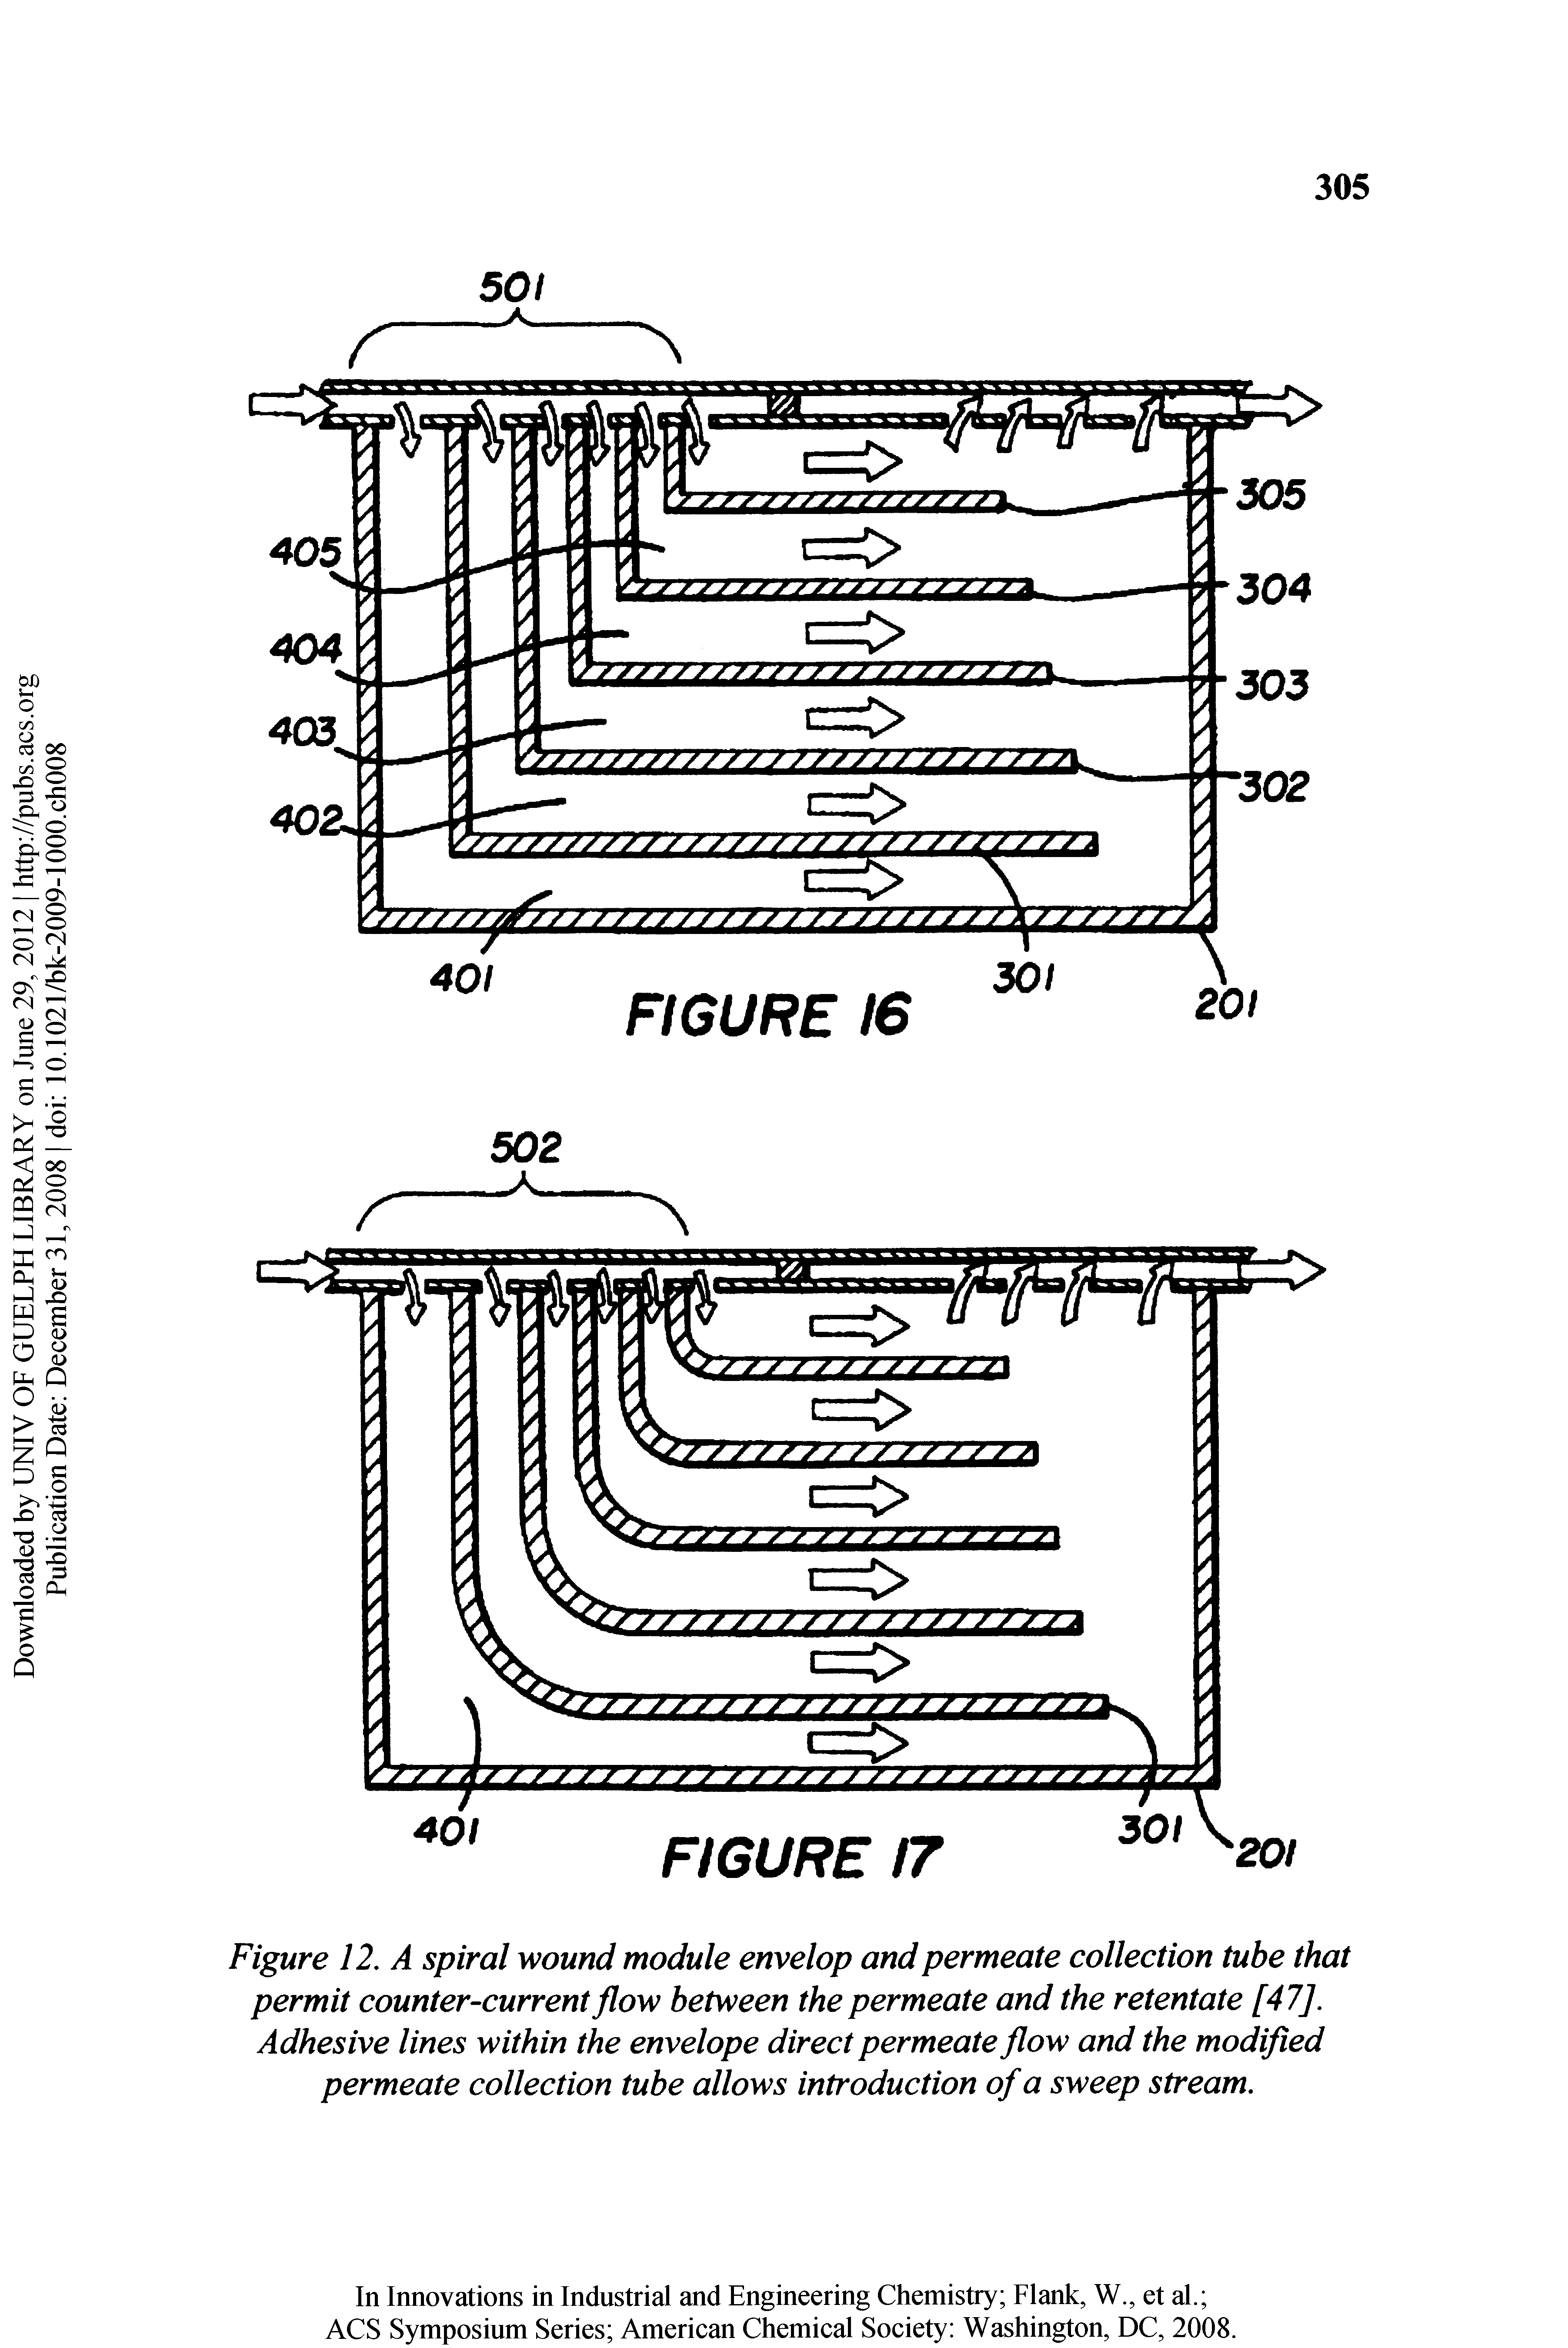 Figure 12, A spiral wound module envelop and permeate collection tube that permit counter-current flow between the permeate and the retentate [47], Adhesive lines within the envelope direct permeate flow and the modified permeate collection tube allows introduction of a sweep stream.